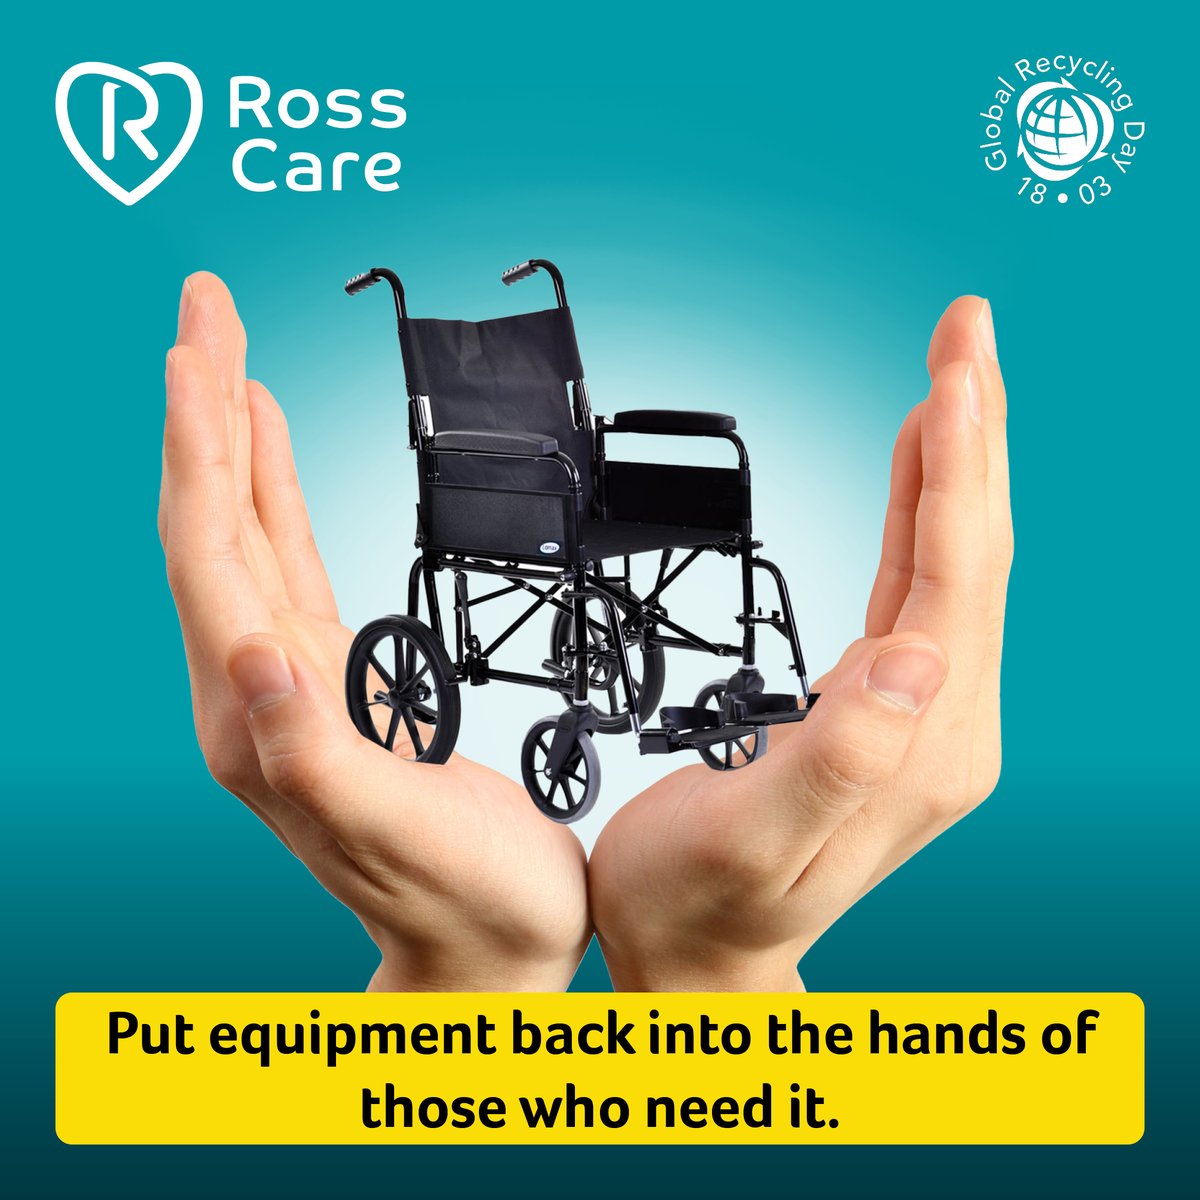 ♻️ Support #GlobalRecyclingDay today! Ross Care is requesting people in our localities to return unused NHS wheelchairs to be #recycled. (A frame sticker will notify if it belongs to the Wheelchair Service) Find your local contact here to arrange: bit.ly/RossRecycle #suffolk